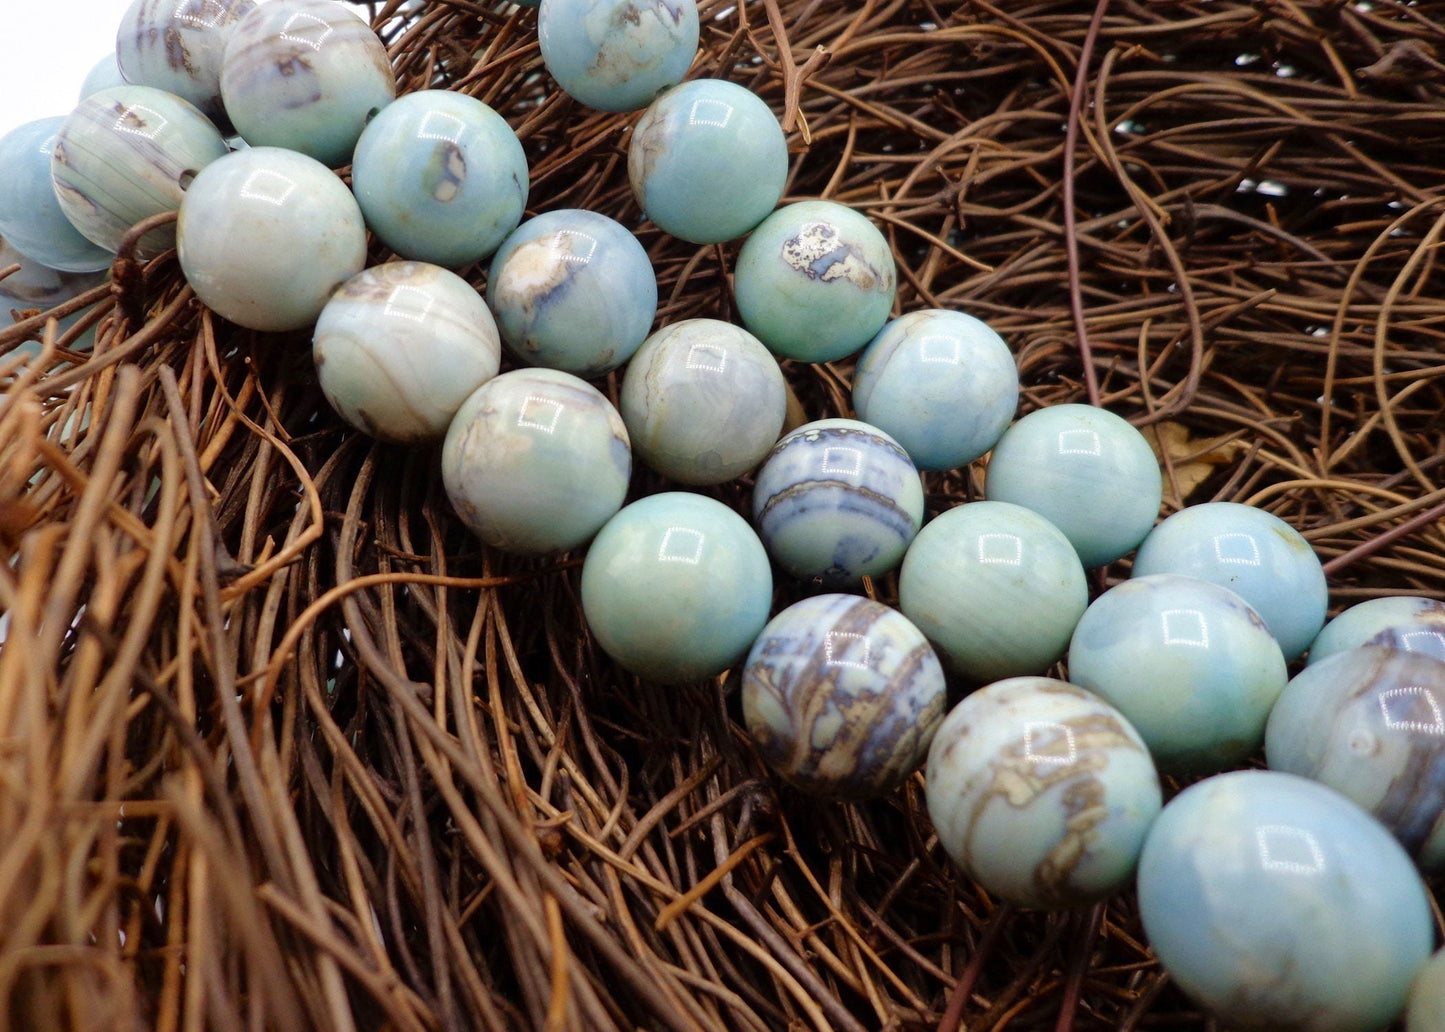 NATURAL Gemstone Dragon Skin Agate, Smooth Round, Blue Brown Earthy Color 6mm, 8mm, 10mm, 12mm Full Strand 16'', Great for Jewelry Making!